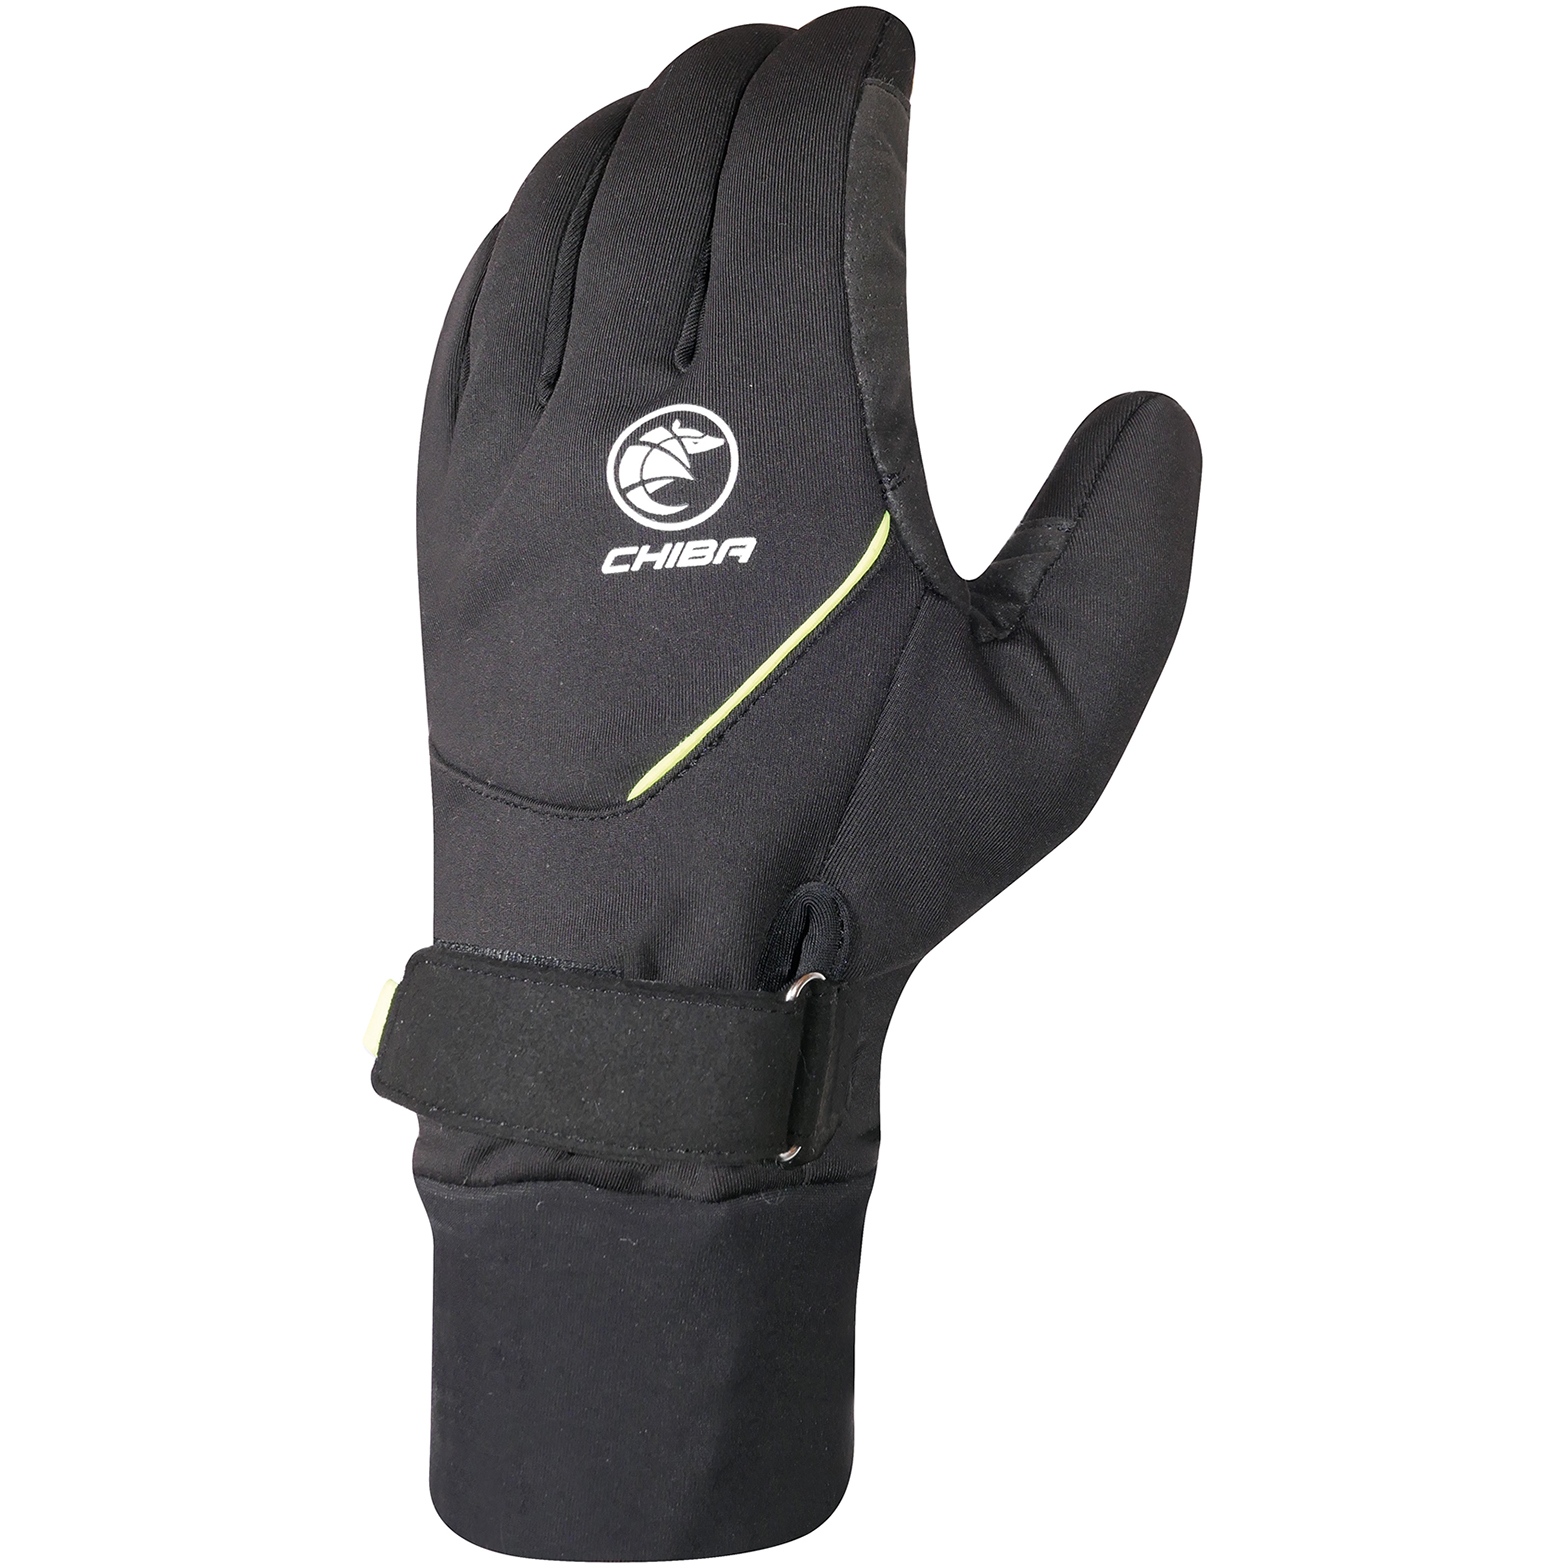 Picture of Chiba Rain Pro Warm Cycling Gloves - black/neon yellow